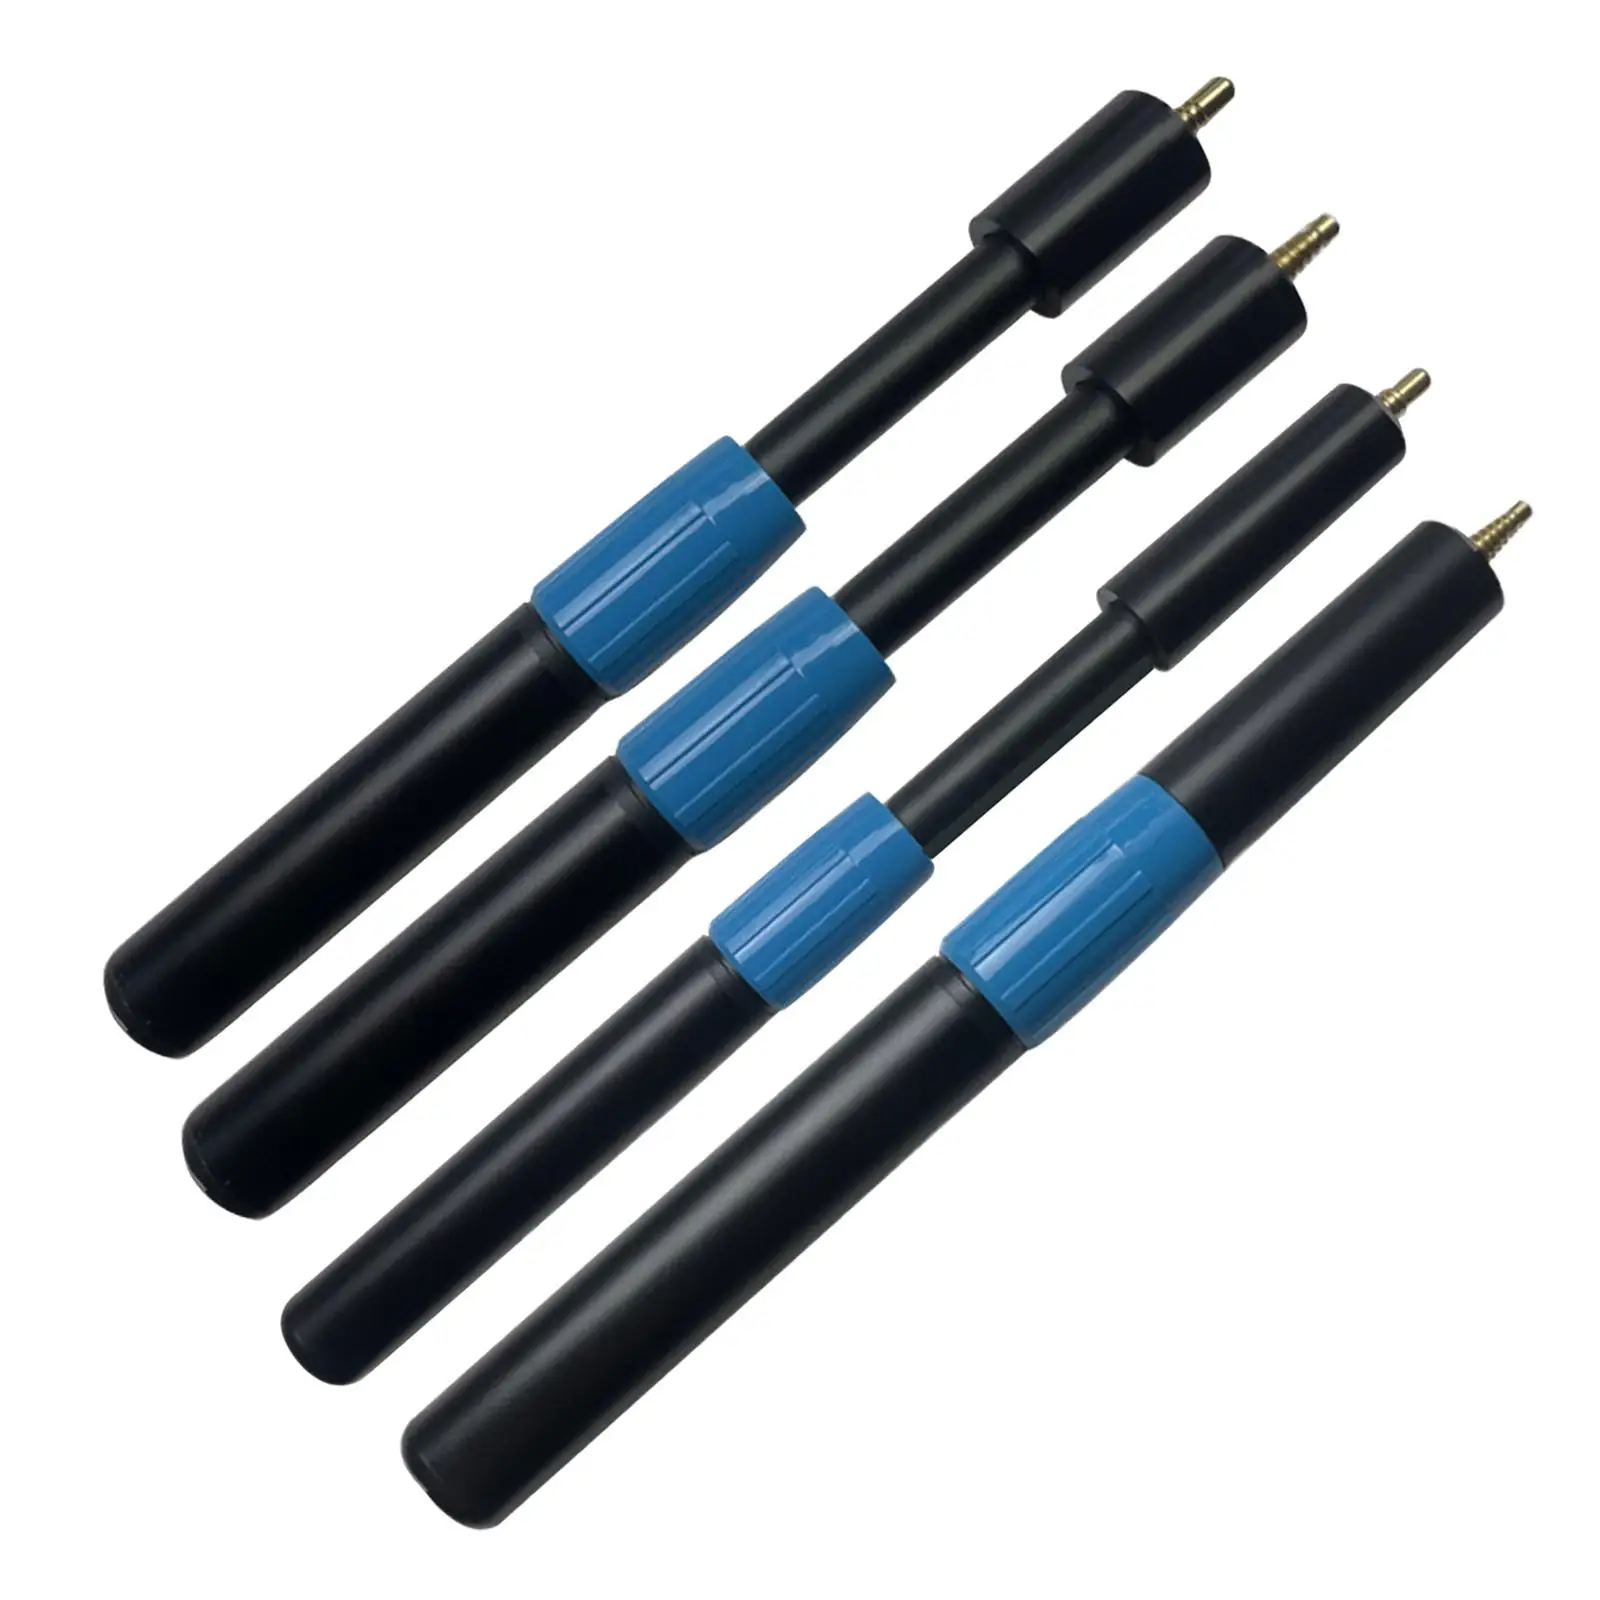 Lightweight Snooker Cue Extender, Durable Snooker Cue Extension Tool, Alloy